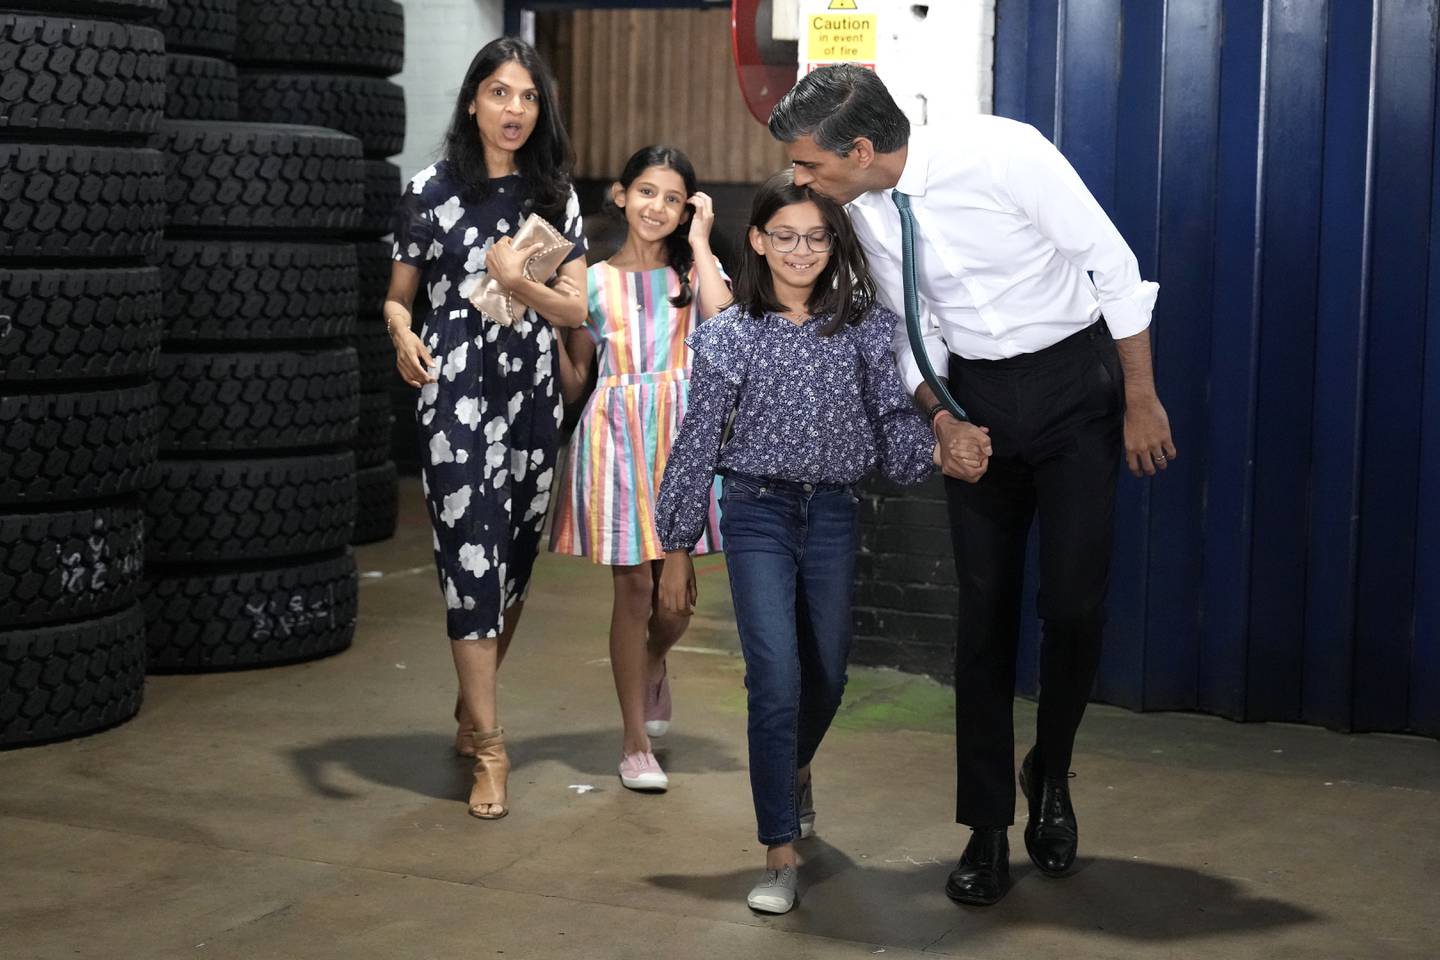 Britain's new prime minister, Rishi Sunak, with daughters Krisna, Anoushka and wife Akshata Murthy. Getty Images 